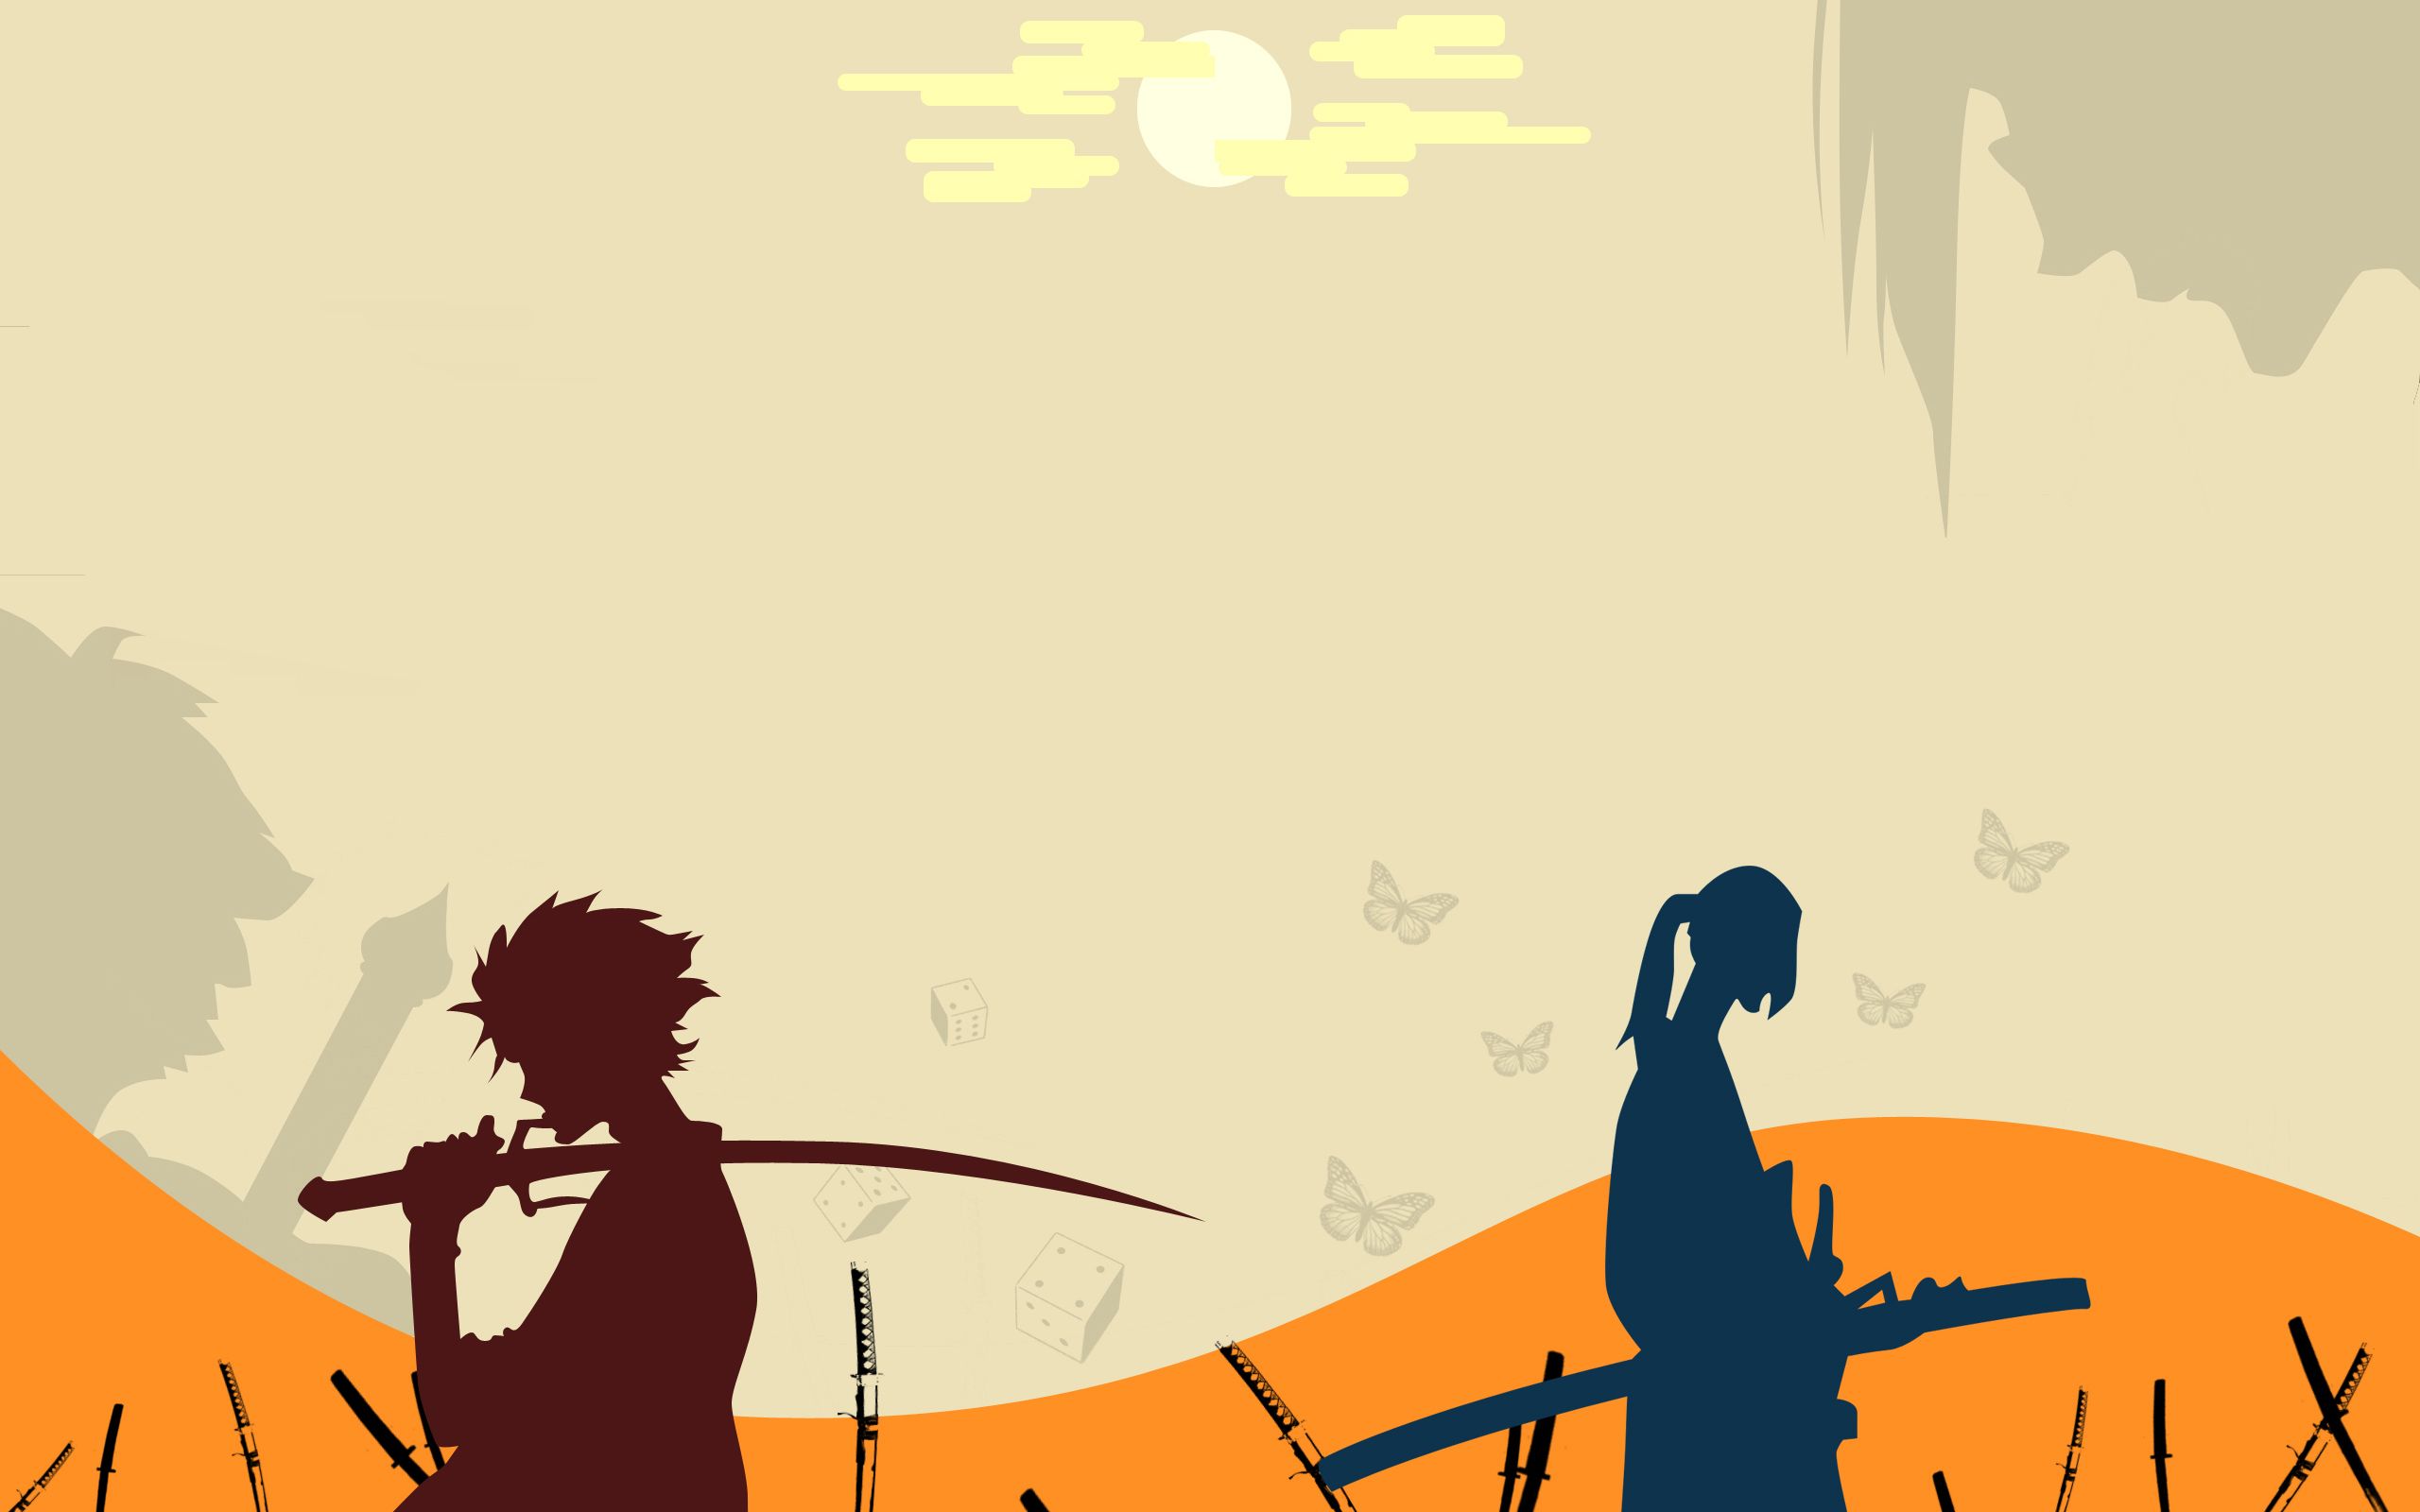 A couple of people standing in the desert - Samurai